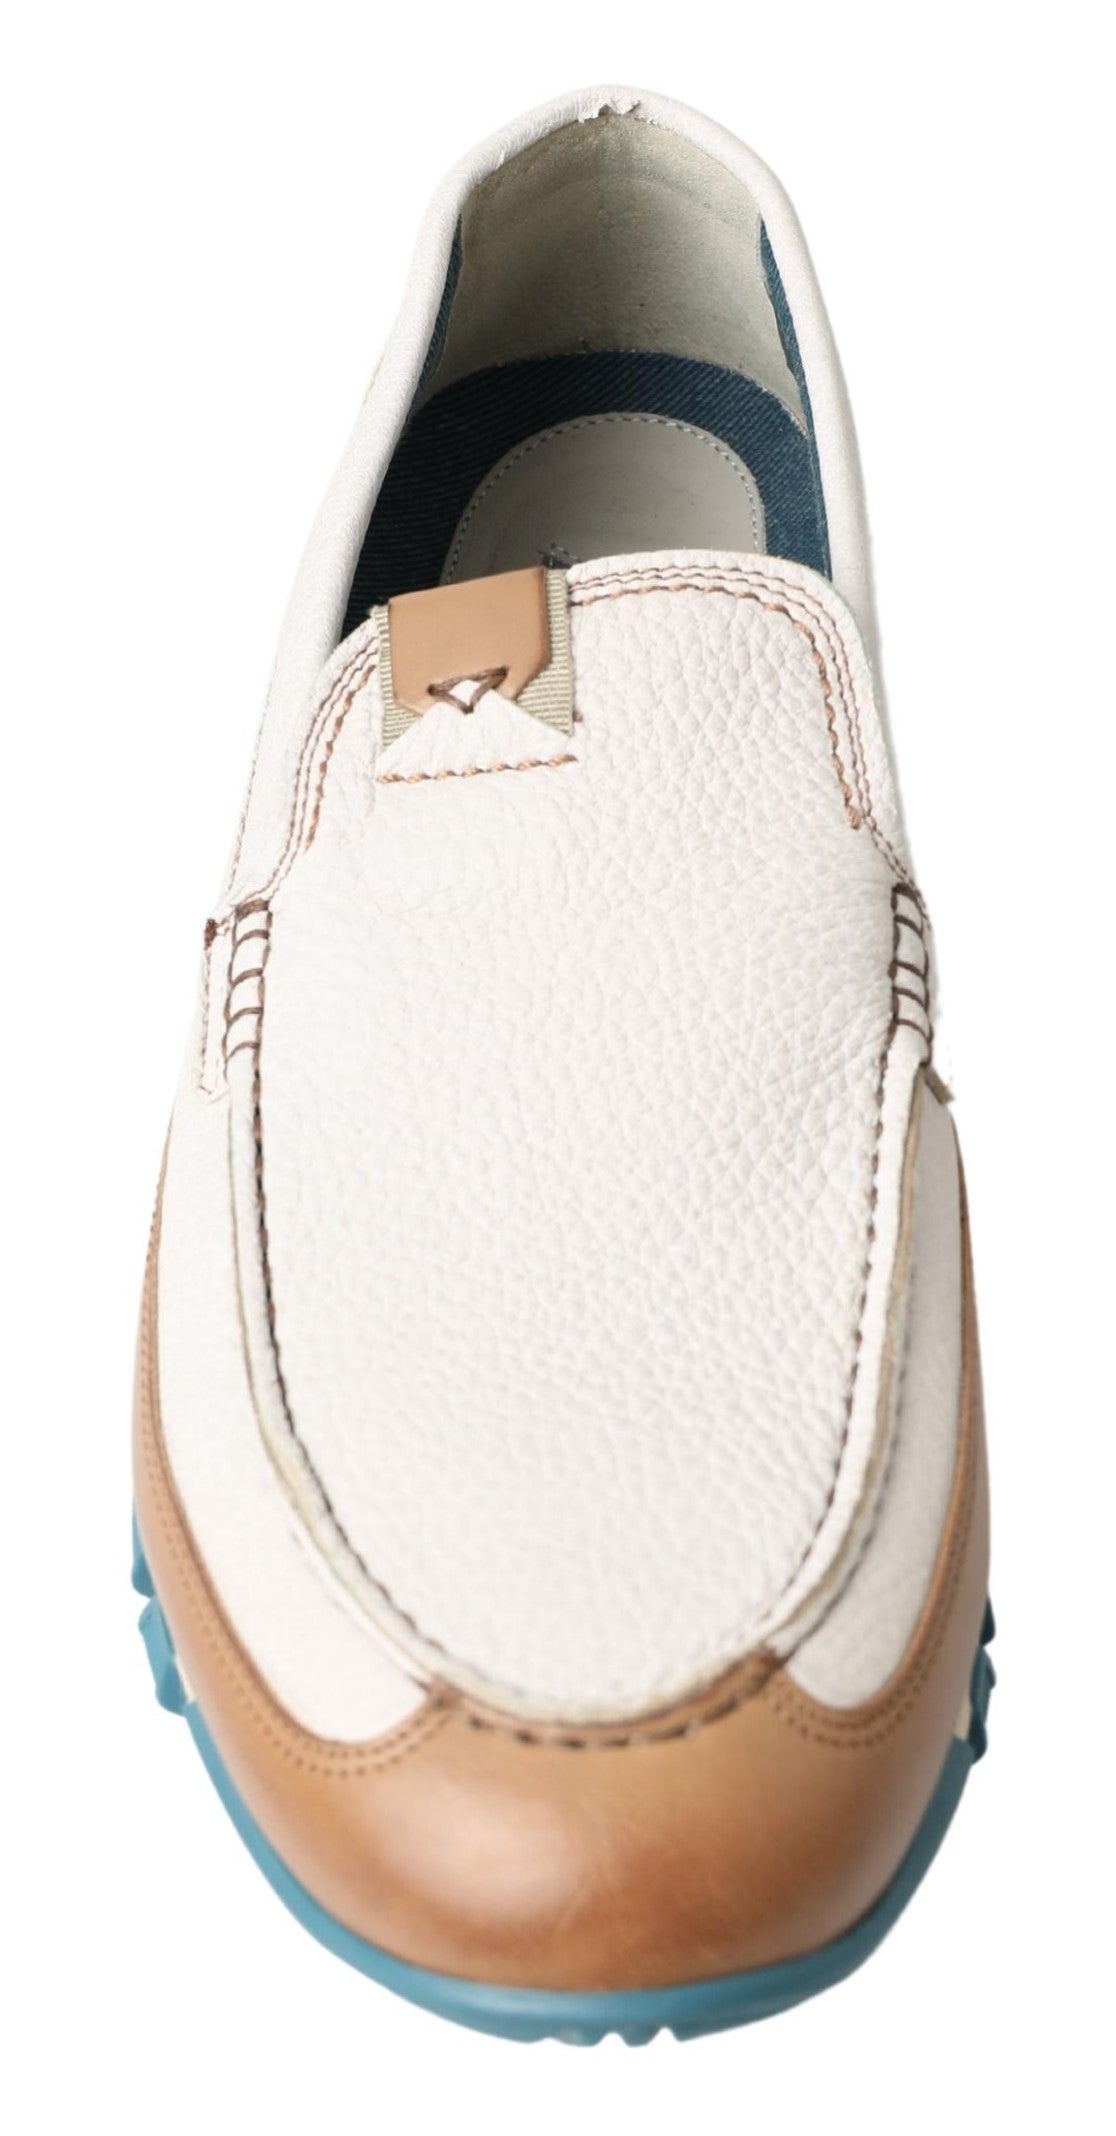 Dolce & Gabbana White Leather Loafers Moccasins Shoes | Fashionsarah.com